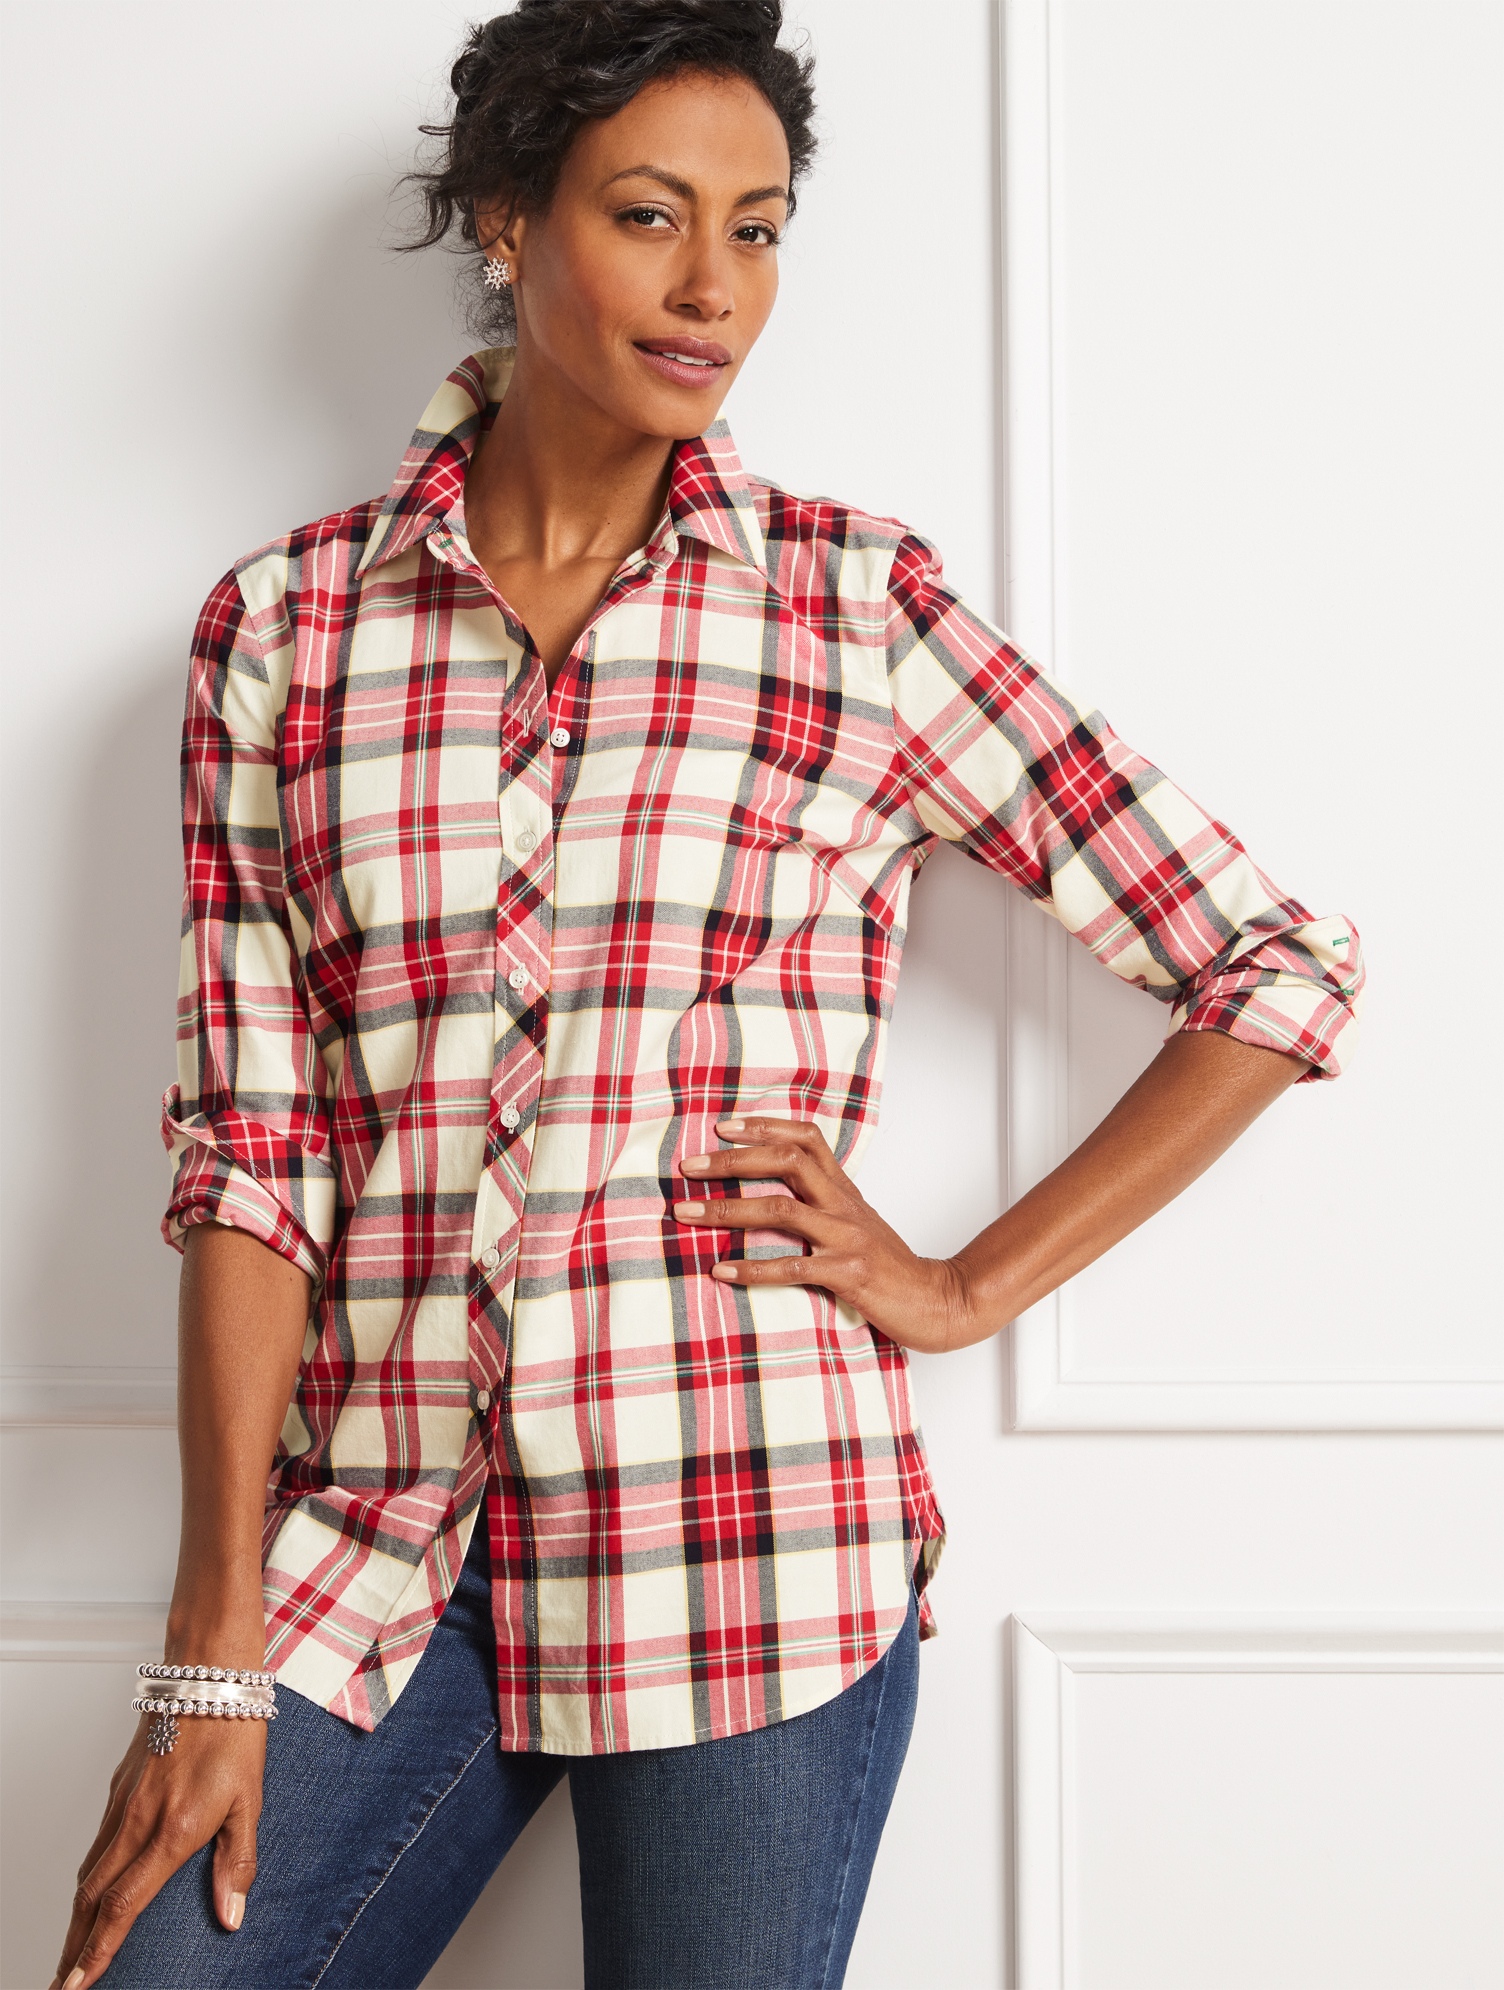 Talbots Cotton Button Front Shirt - Beautiful Plaid - Red - 2x